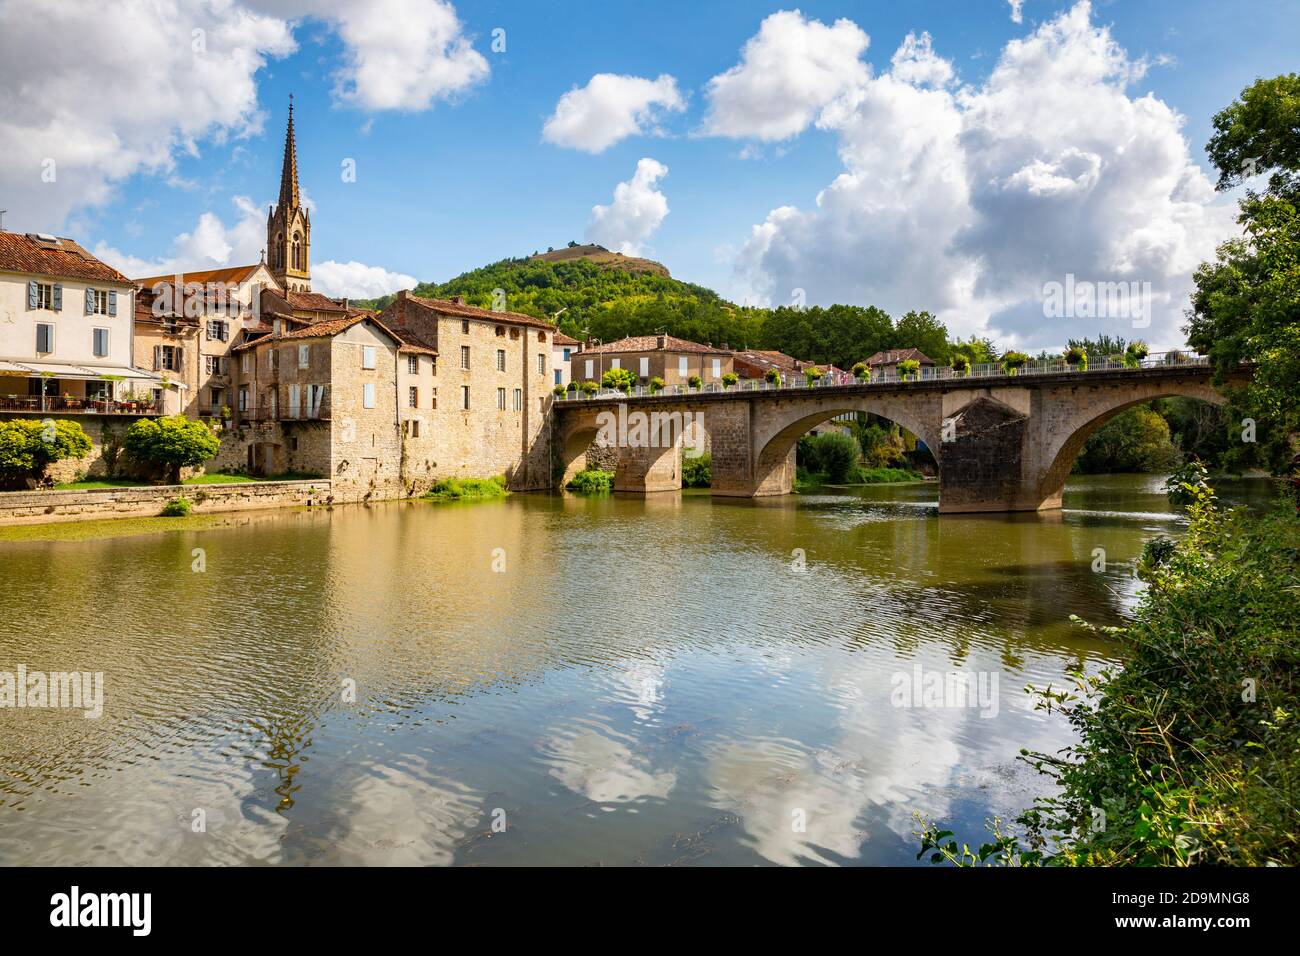 St Antonin Noble Val is a charming, small, medieval town beside the Aveyron river in the Tarn et Garonne department of Southern France. Stock Photo